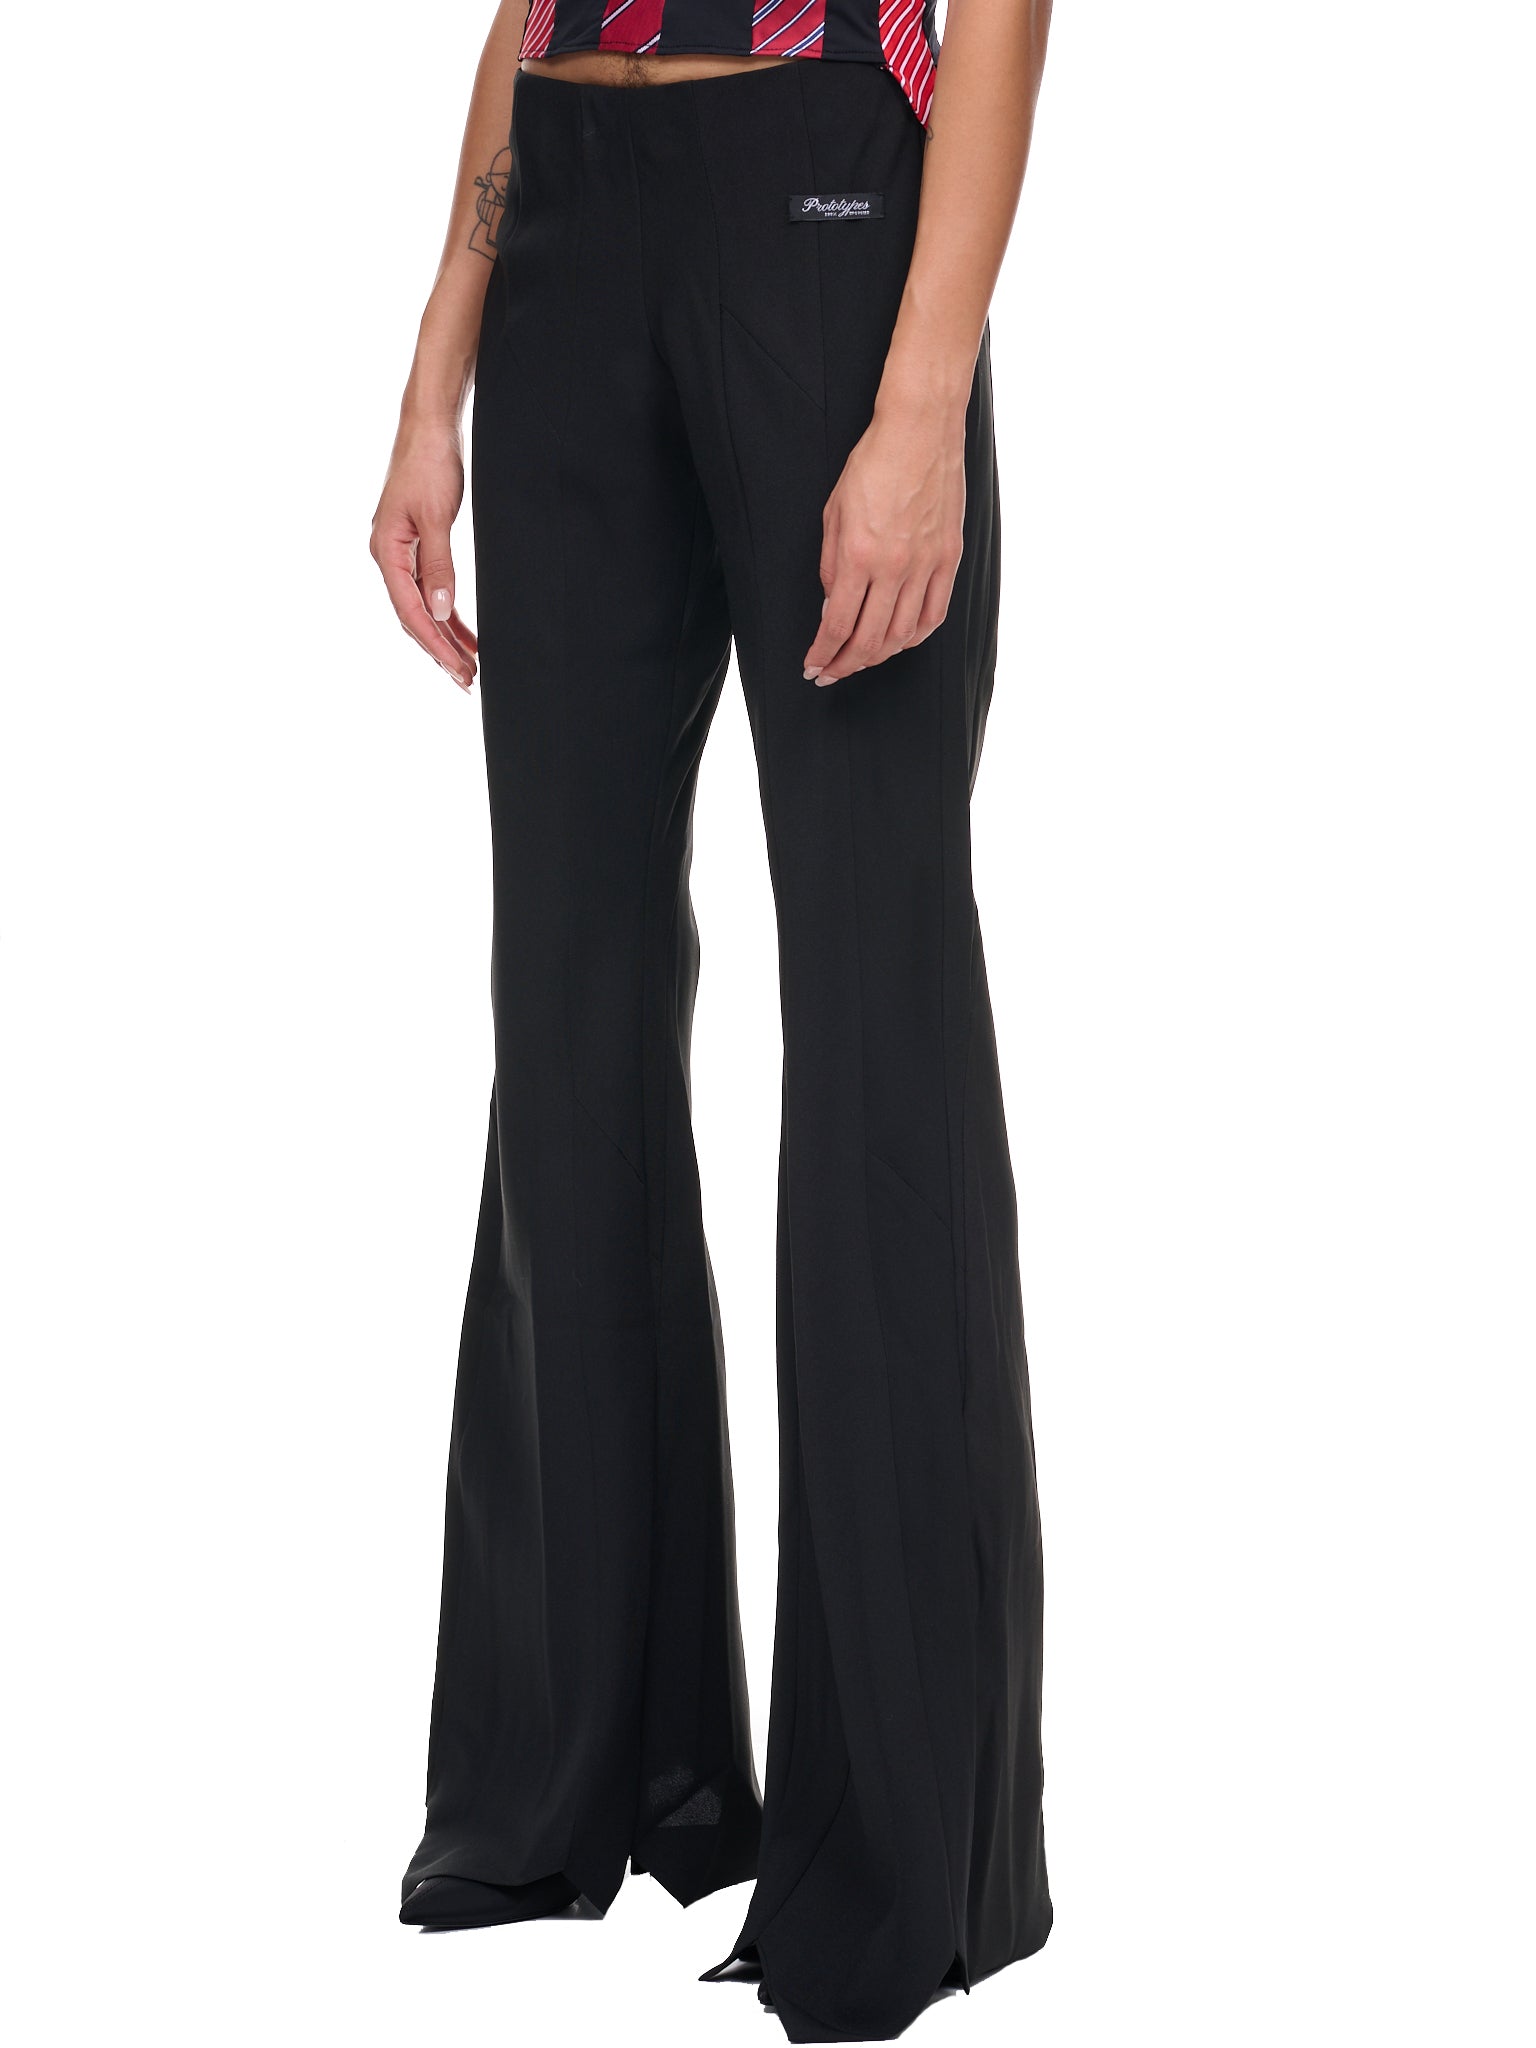 Tailored Trousers (PT2LL02P01-BLACK)